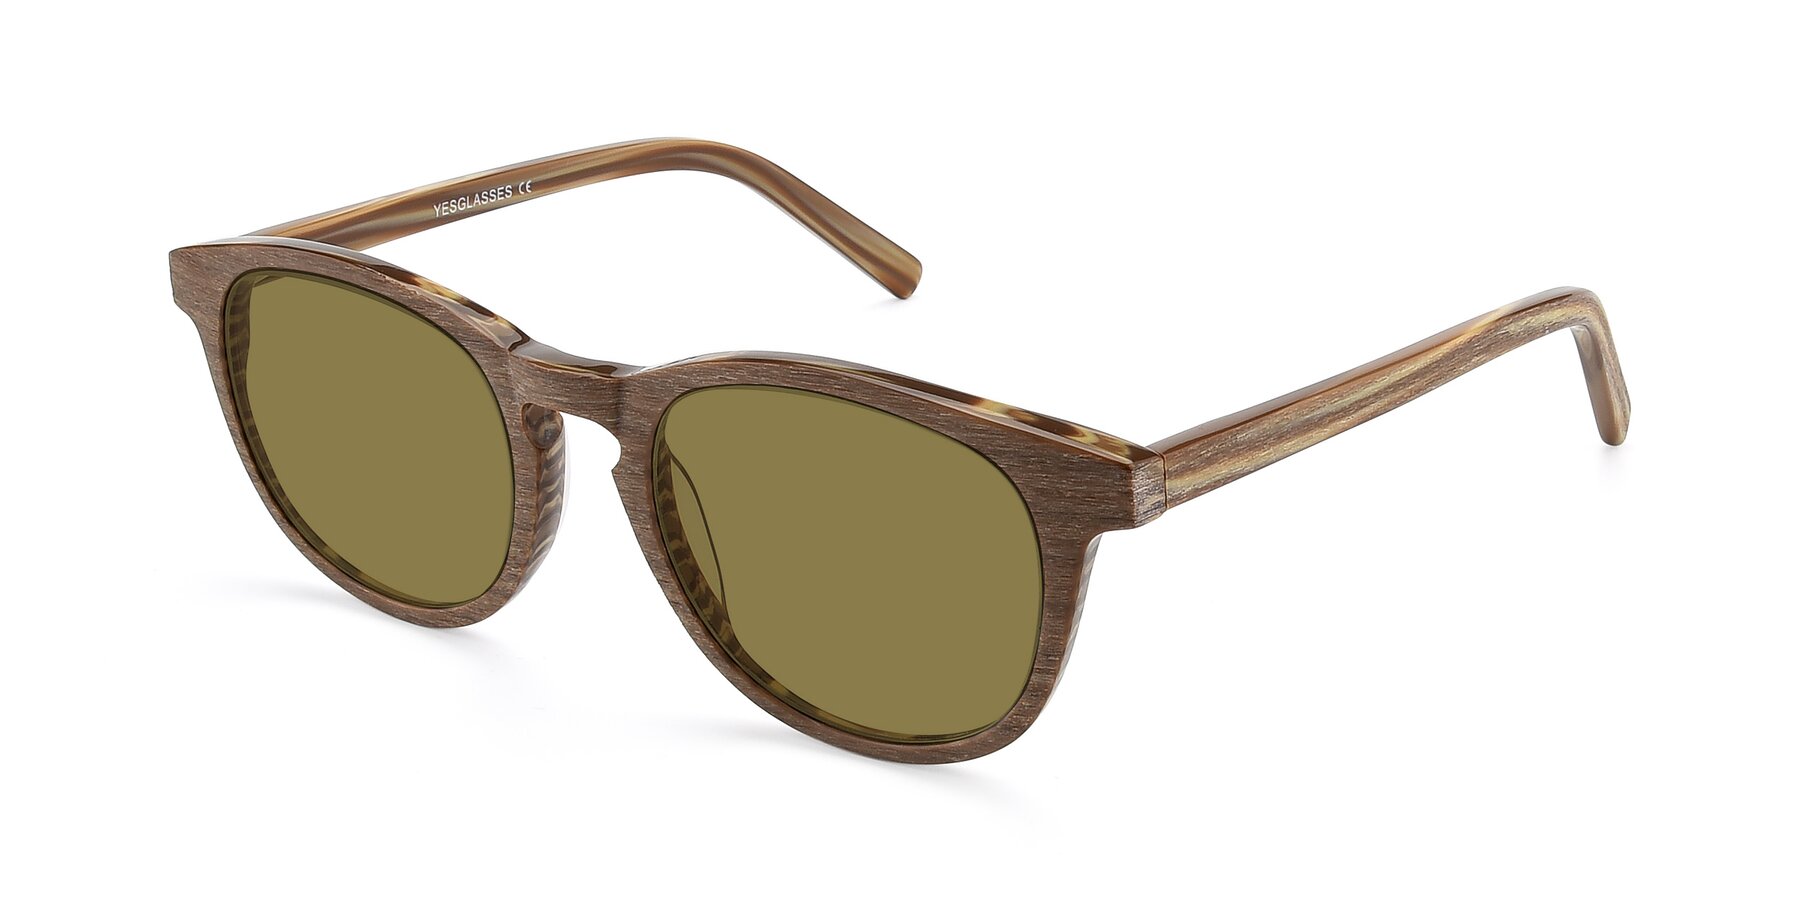 Angle of SR6044 in Brown-Wooden with Brown Polarized Lenses